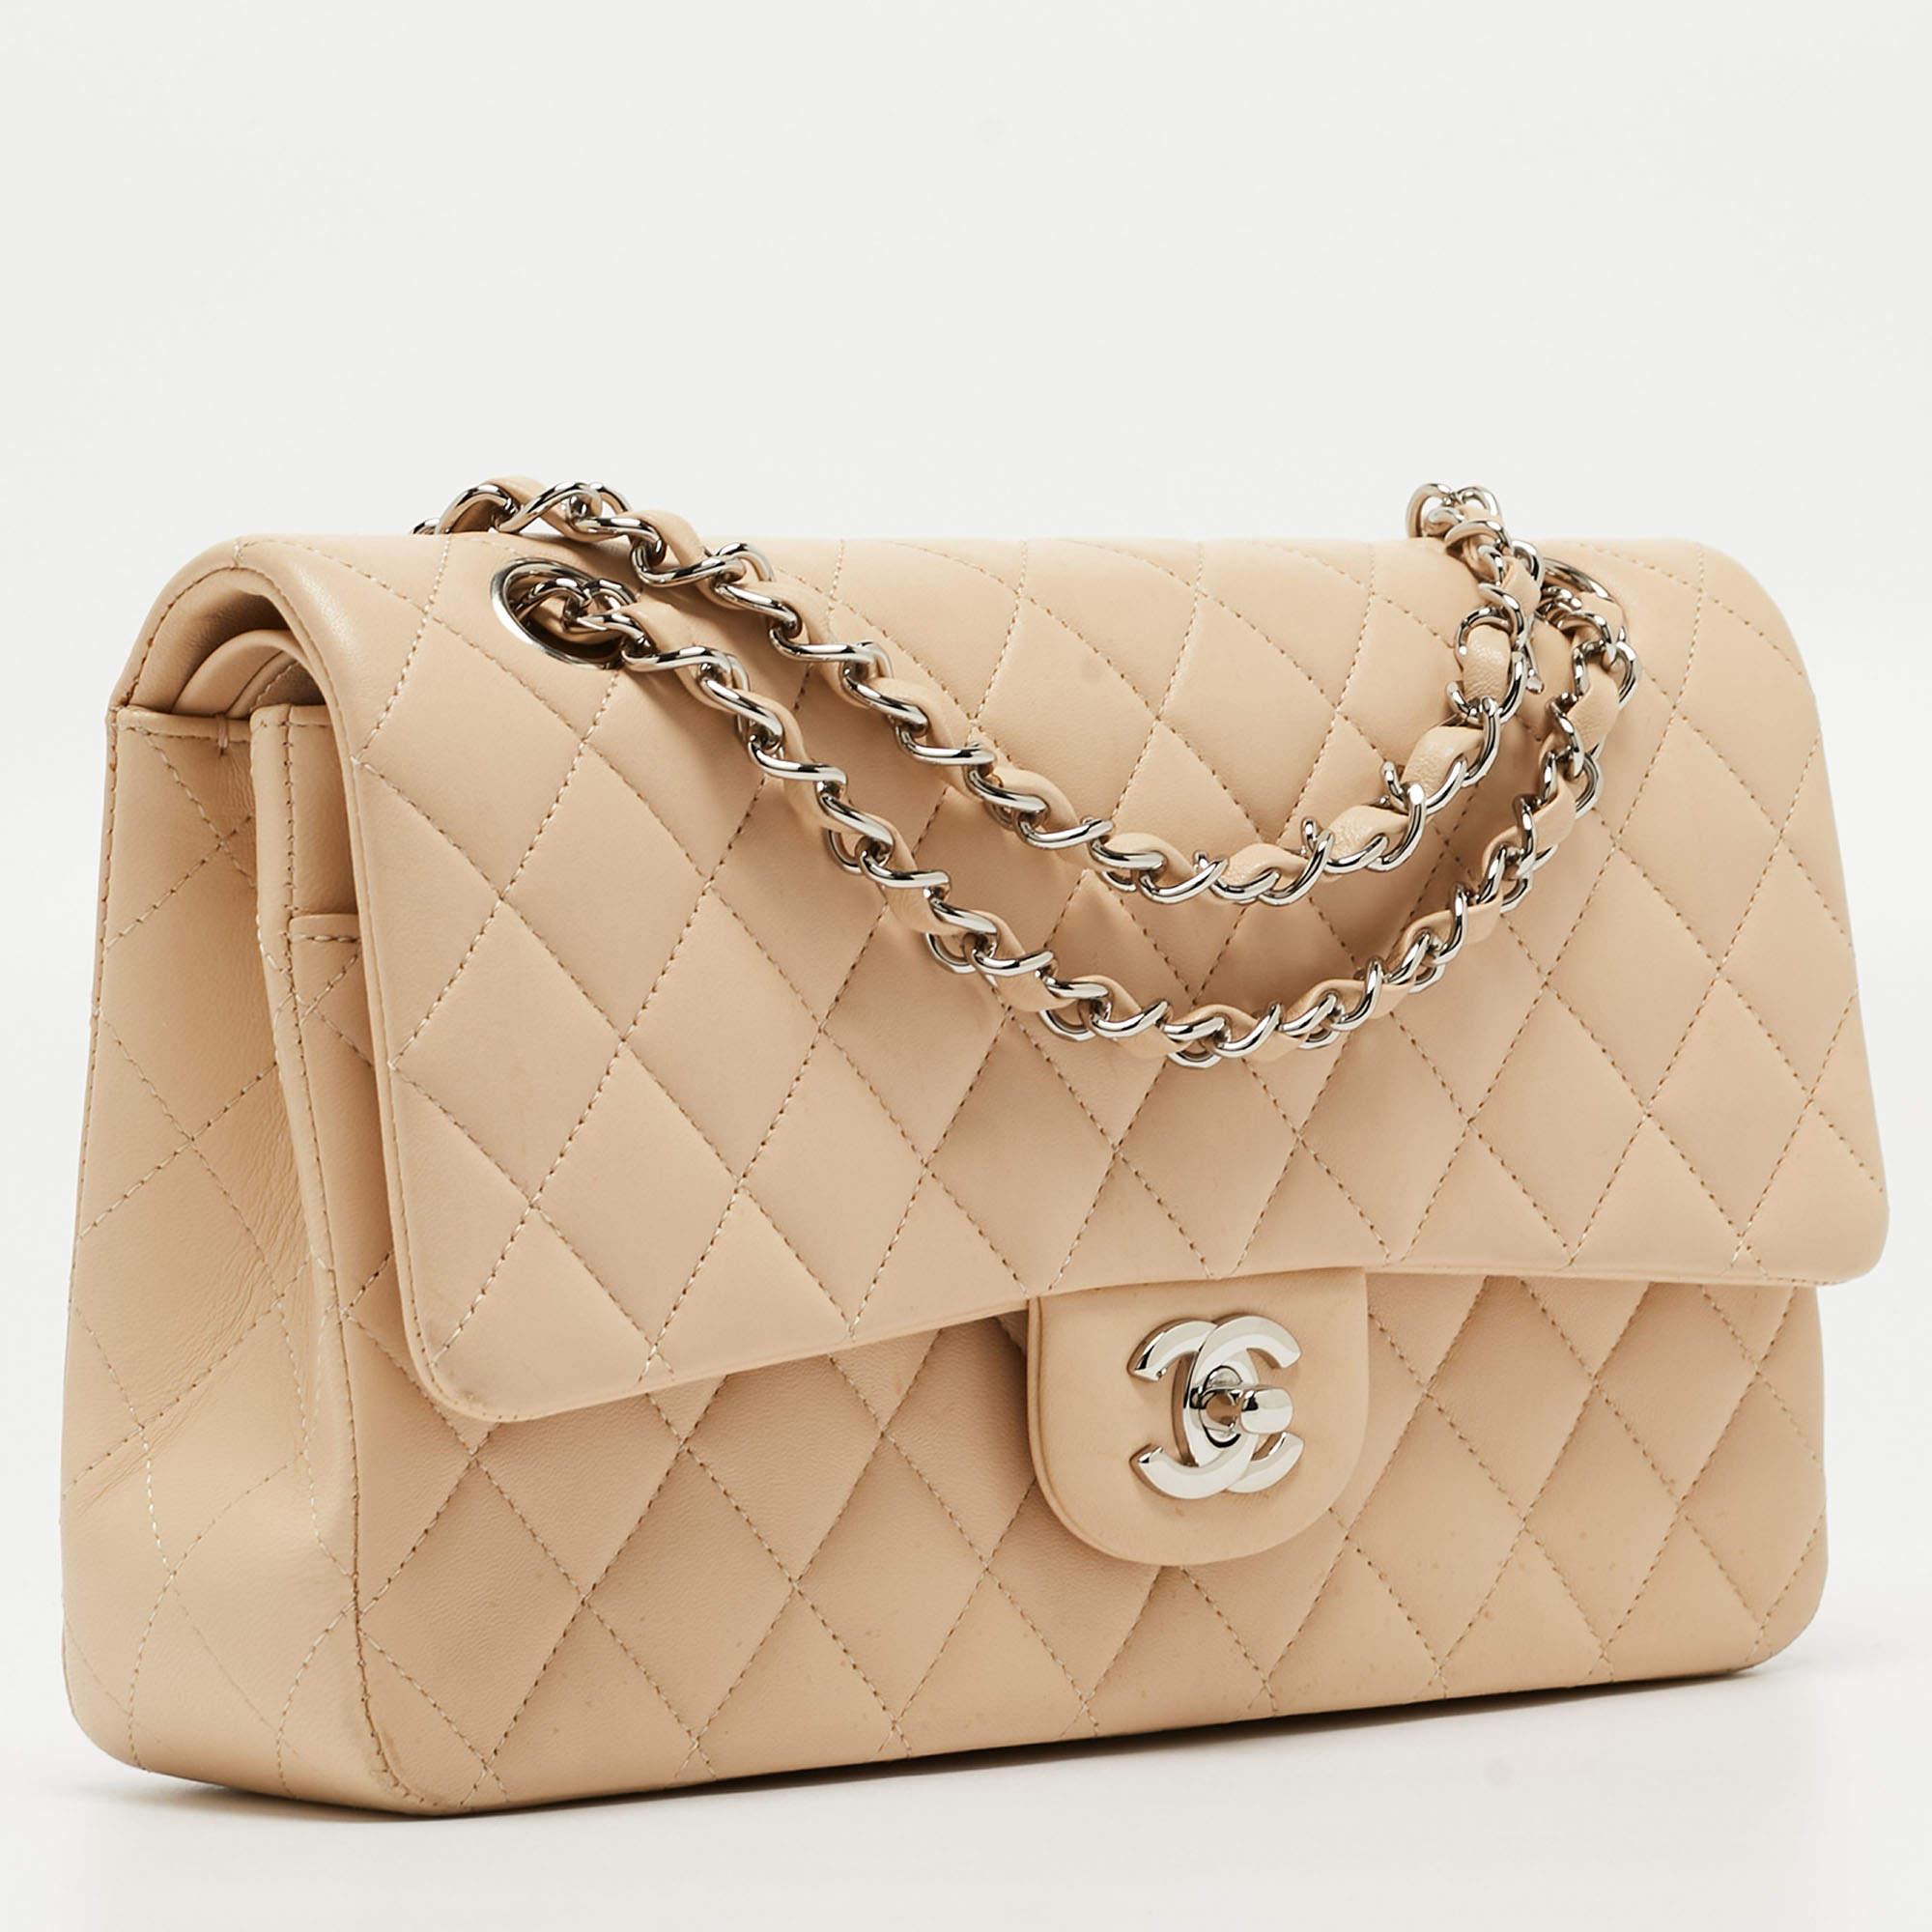 Women's Chanel Beige Quilted Leather Medium Classic Double Flap Bag For Sale